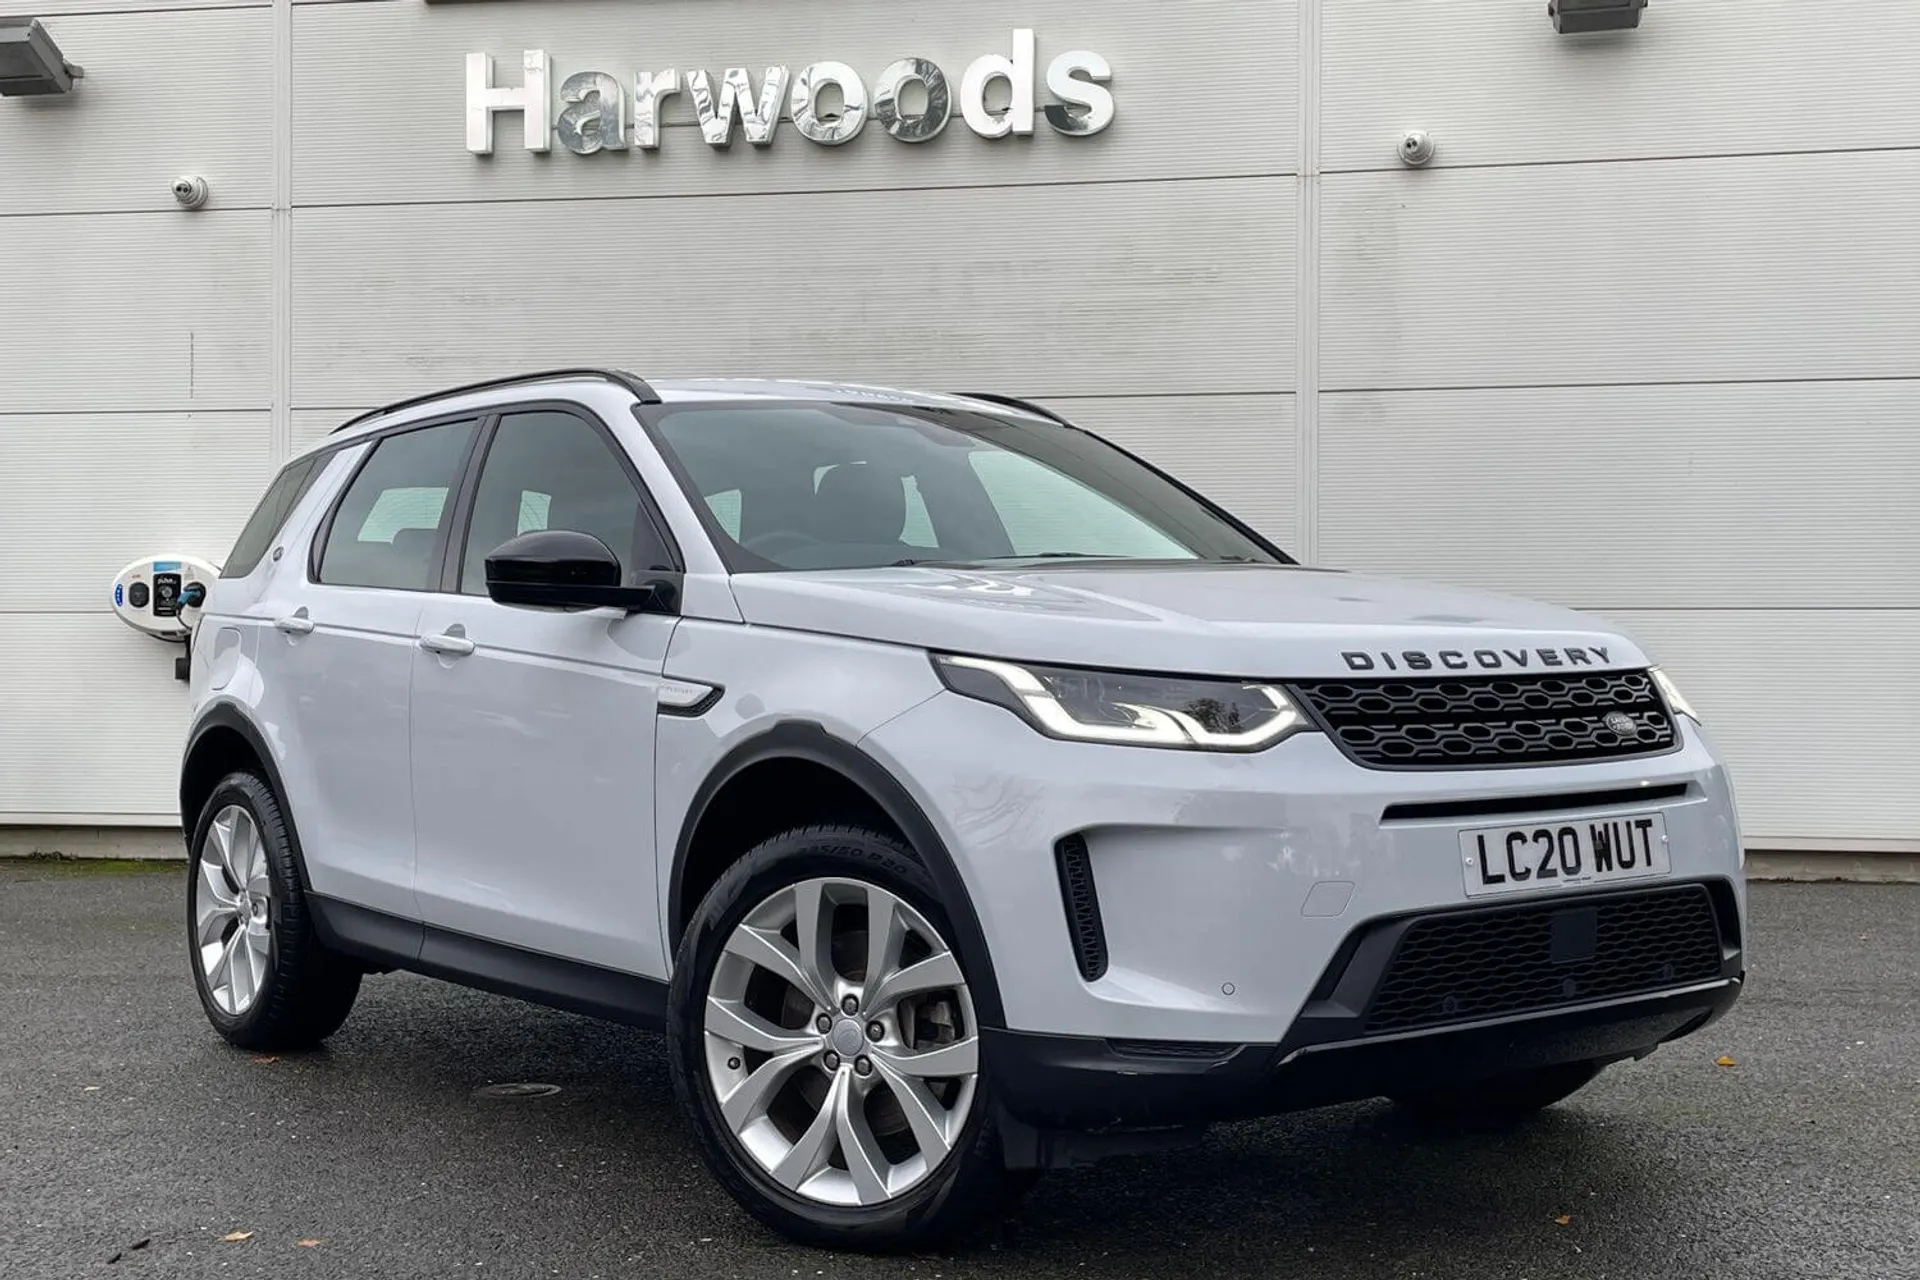 LAND ROVER DISCOVERY SPORT focused image